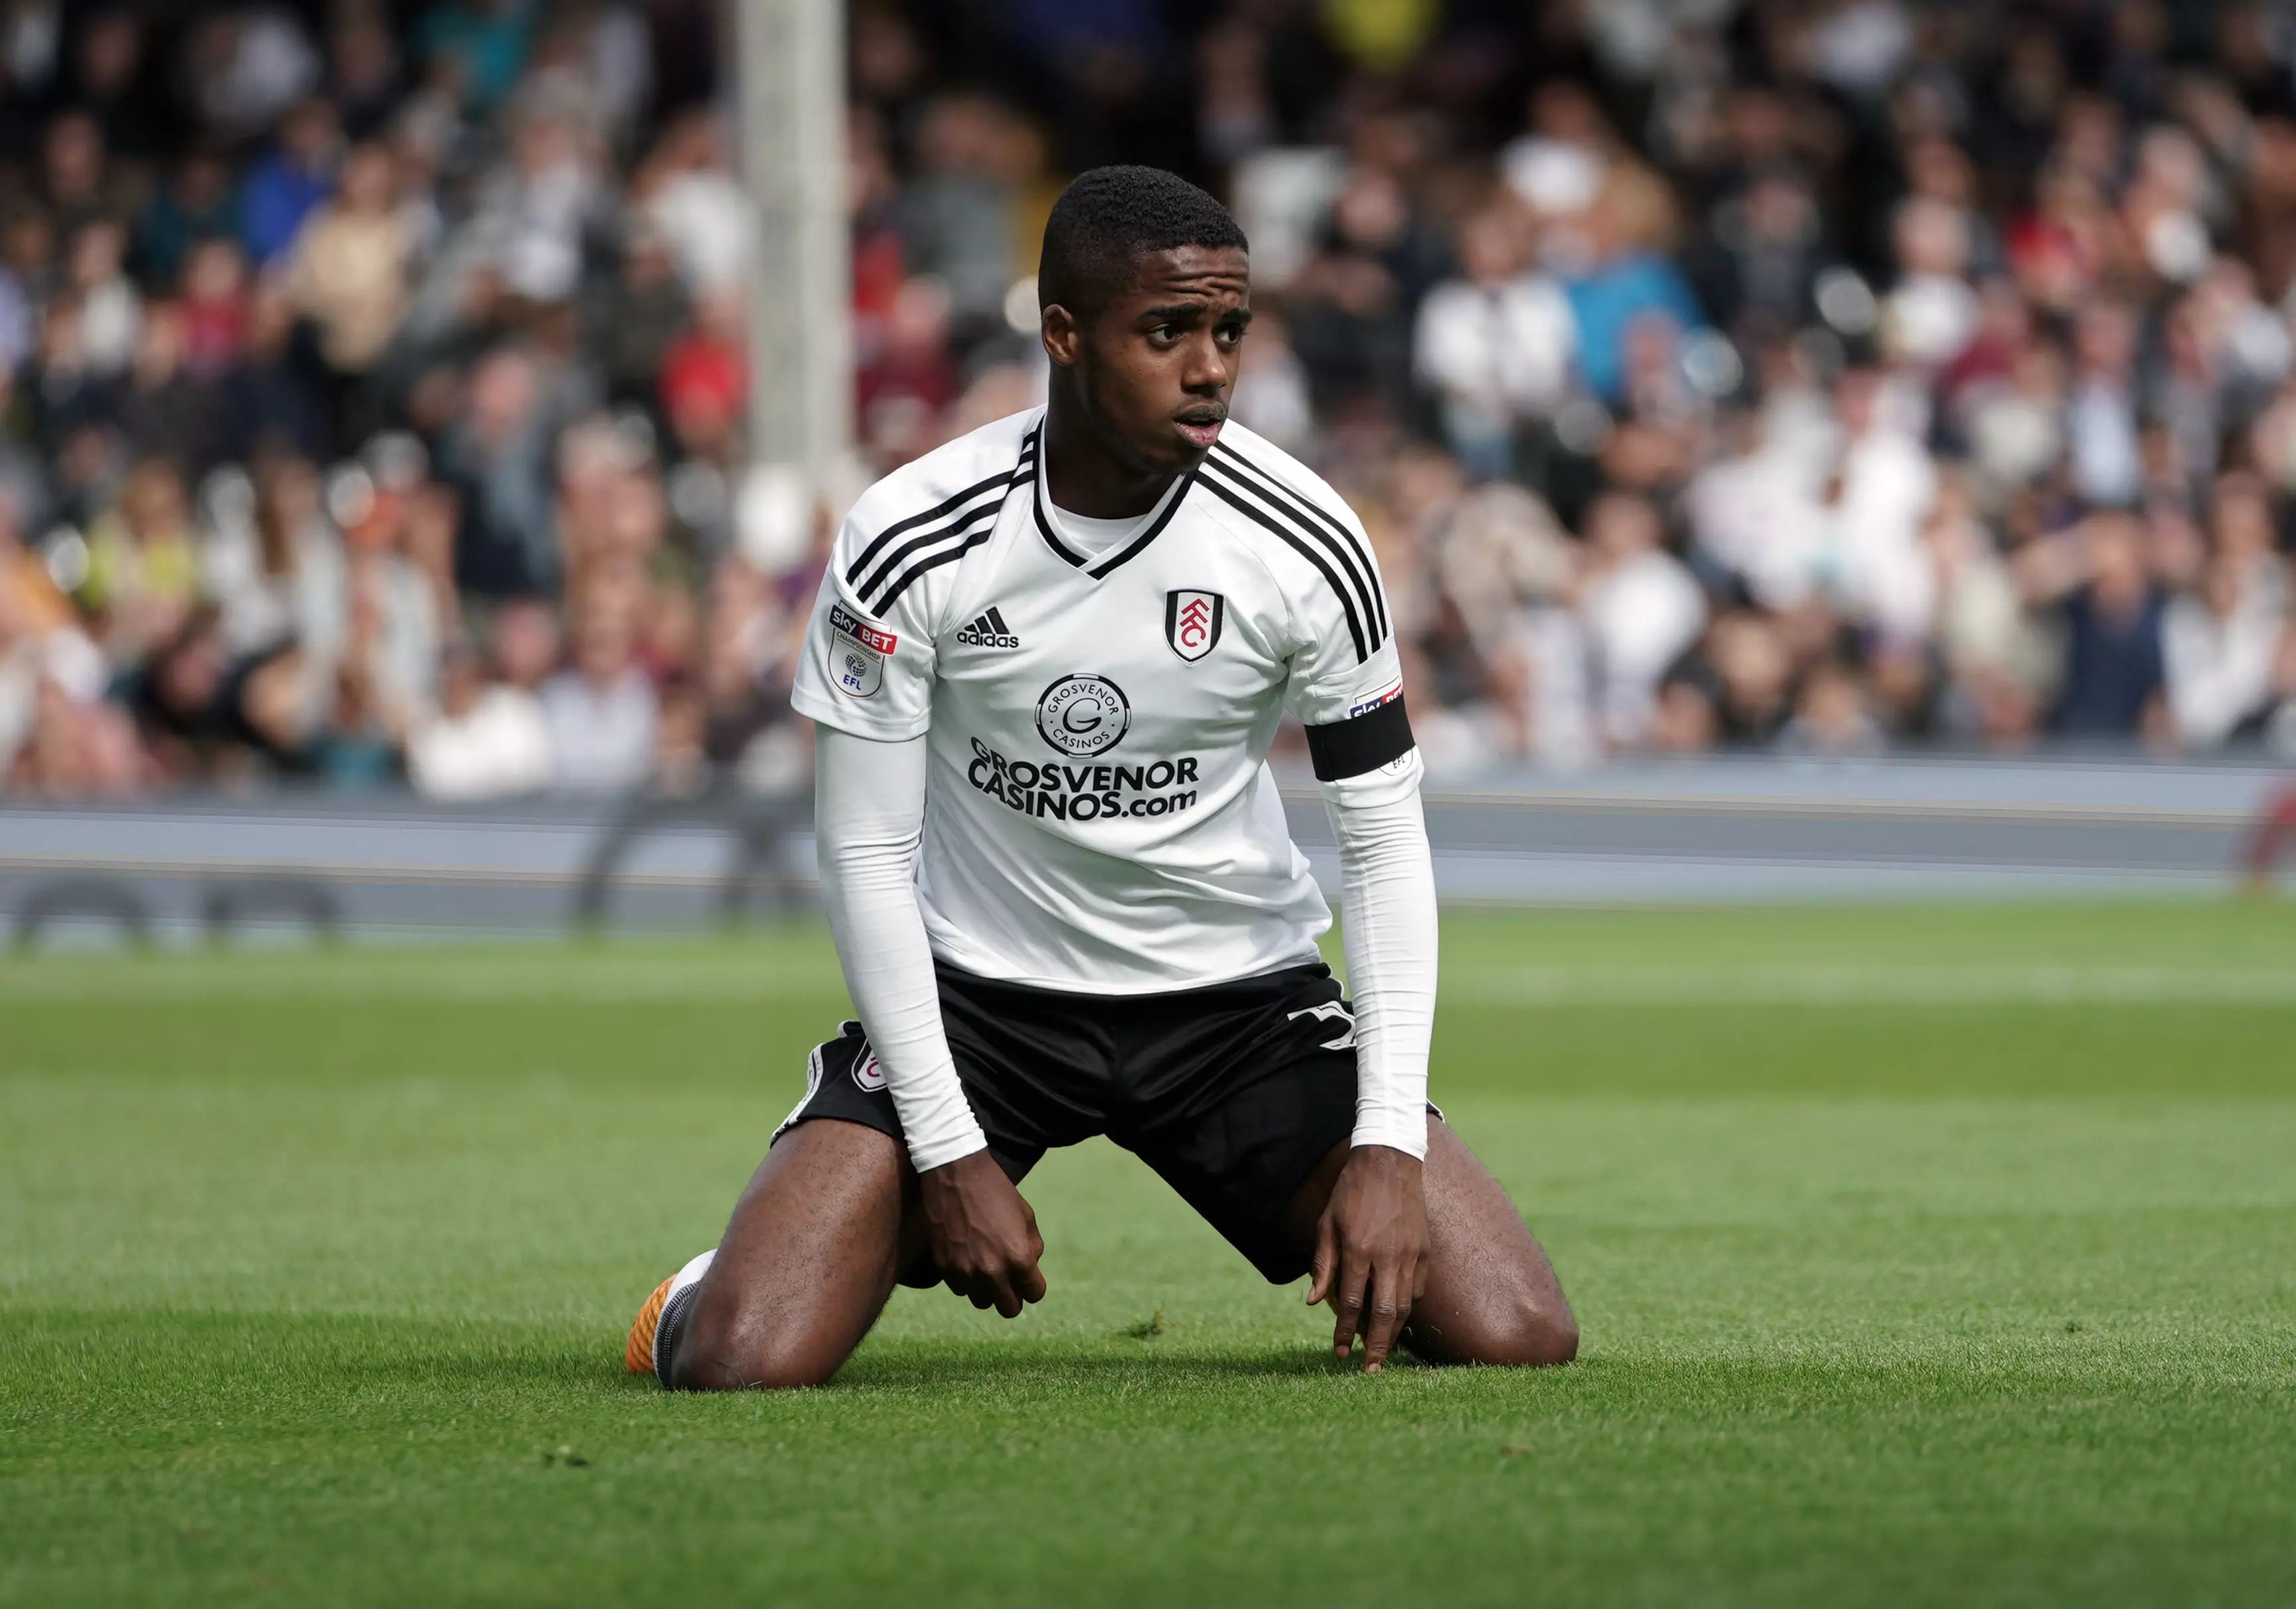 Sessegnon has played both at left back and left wing. Image: PA Images.